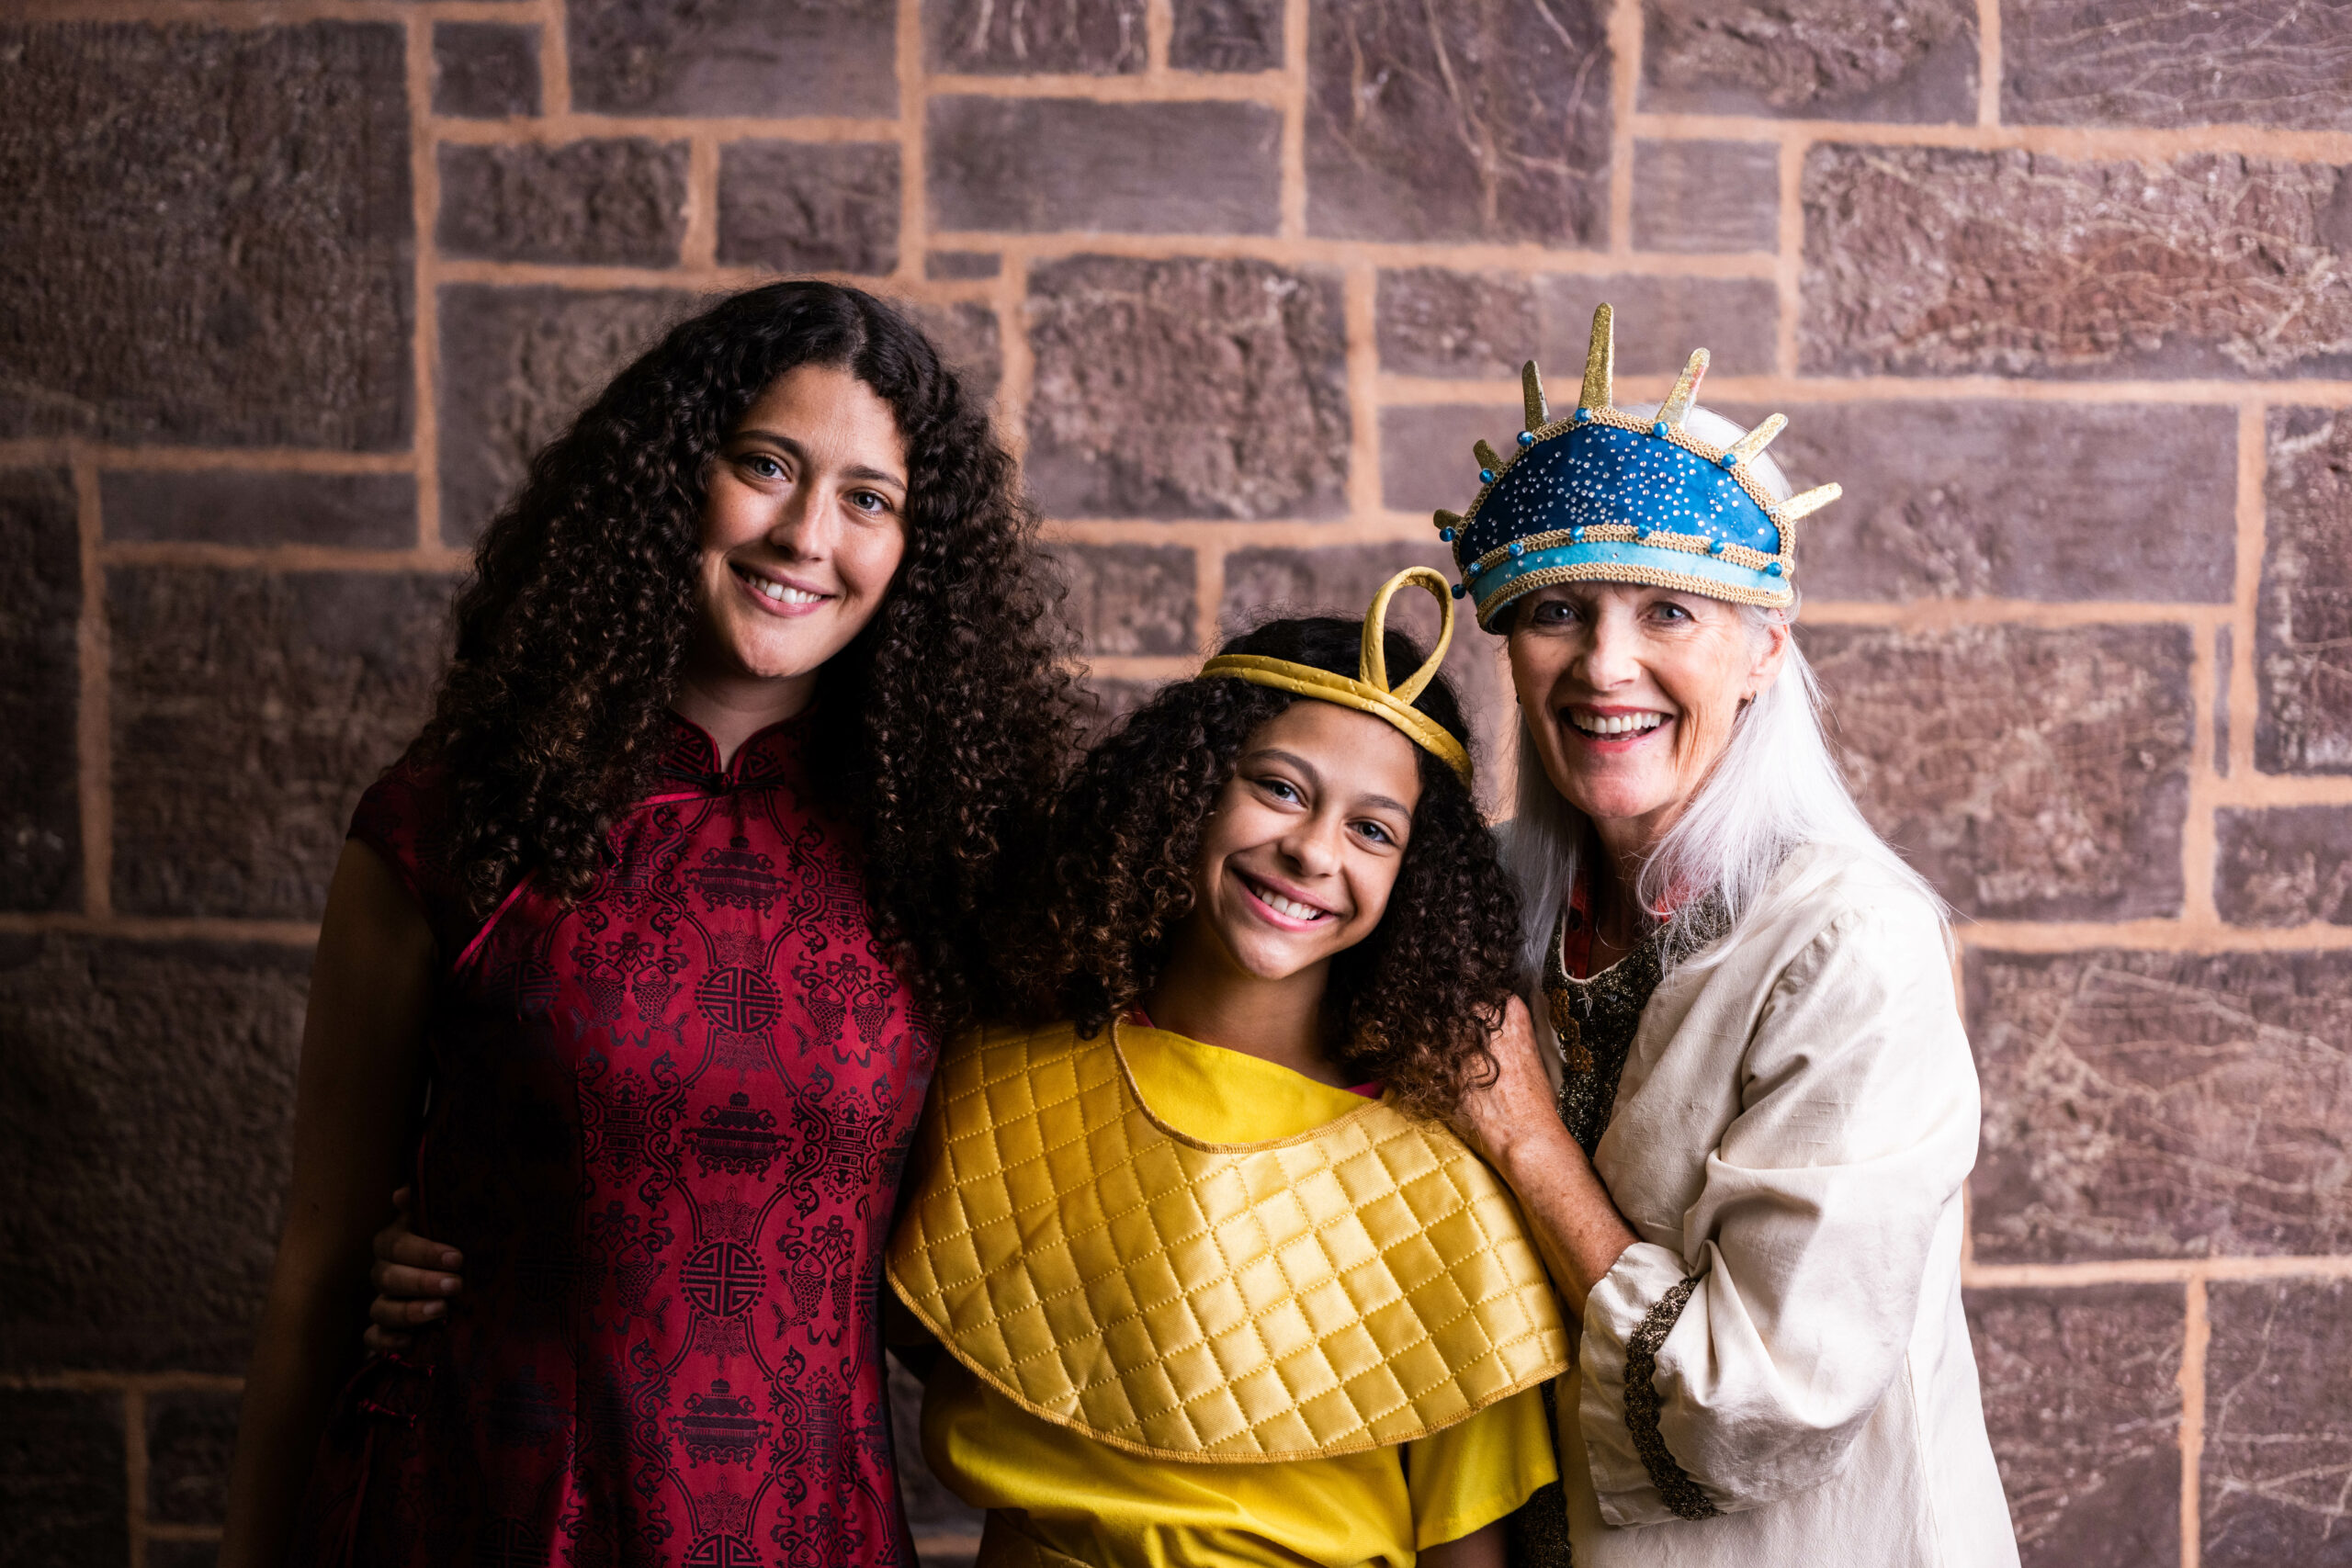 Image of an older lady with two younger ladies dressing up in fancy dress costumes